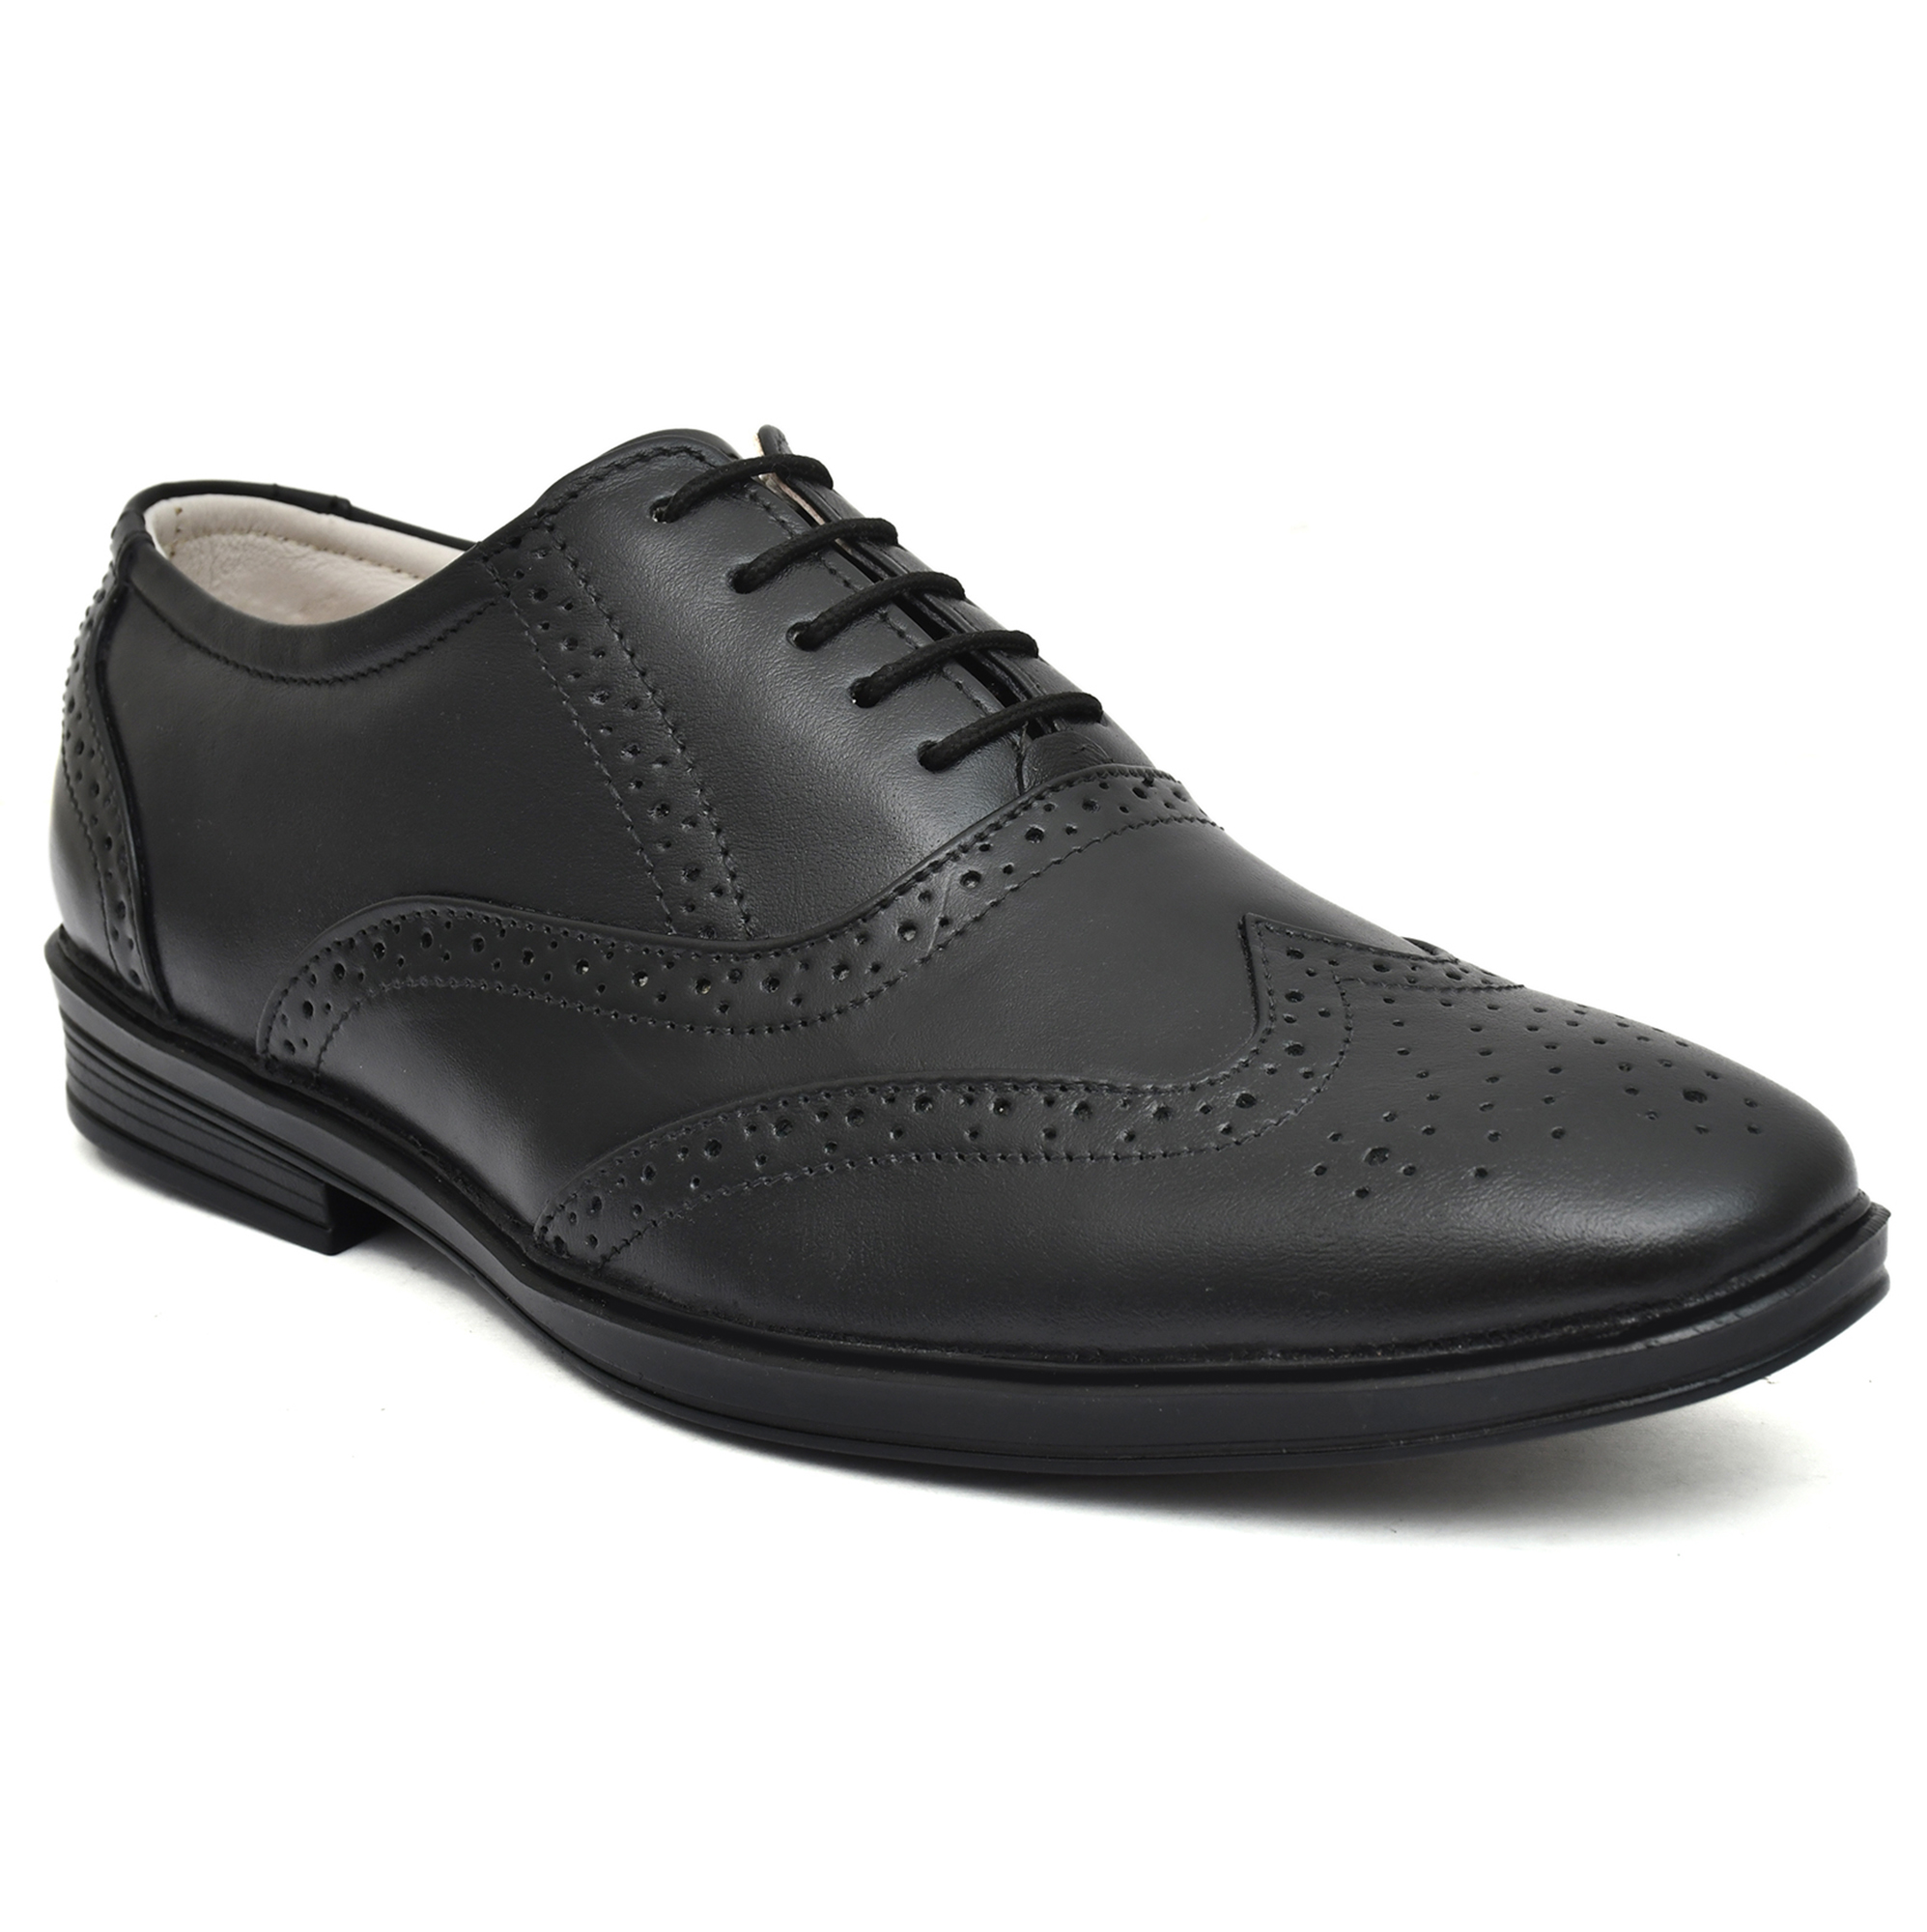 Pure Leather Oxford shoes by asm.